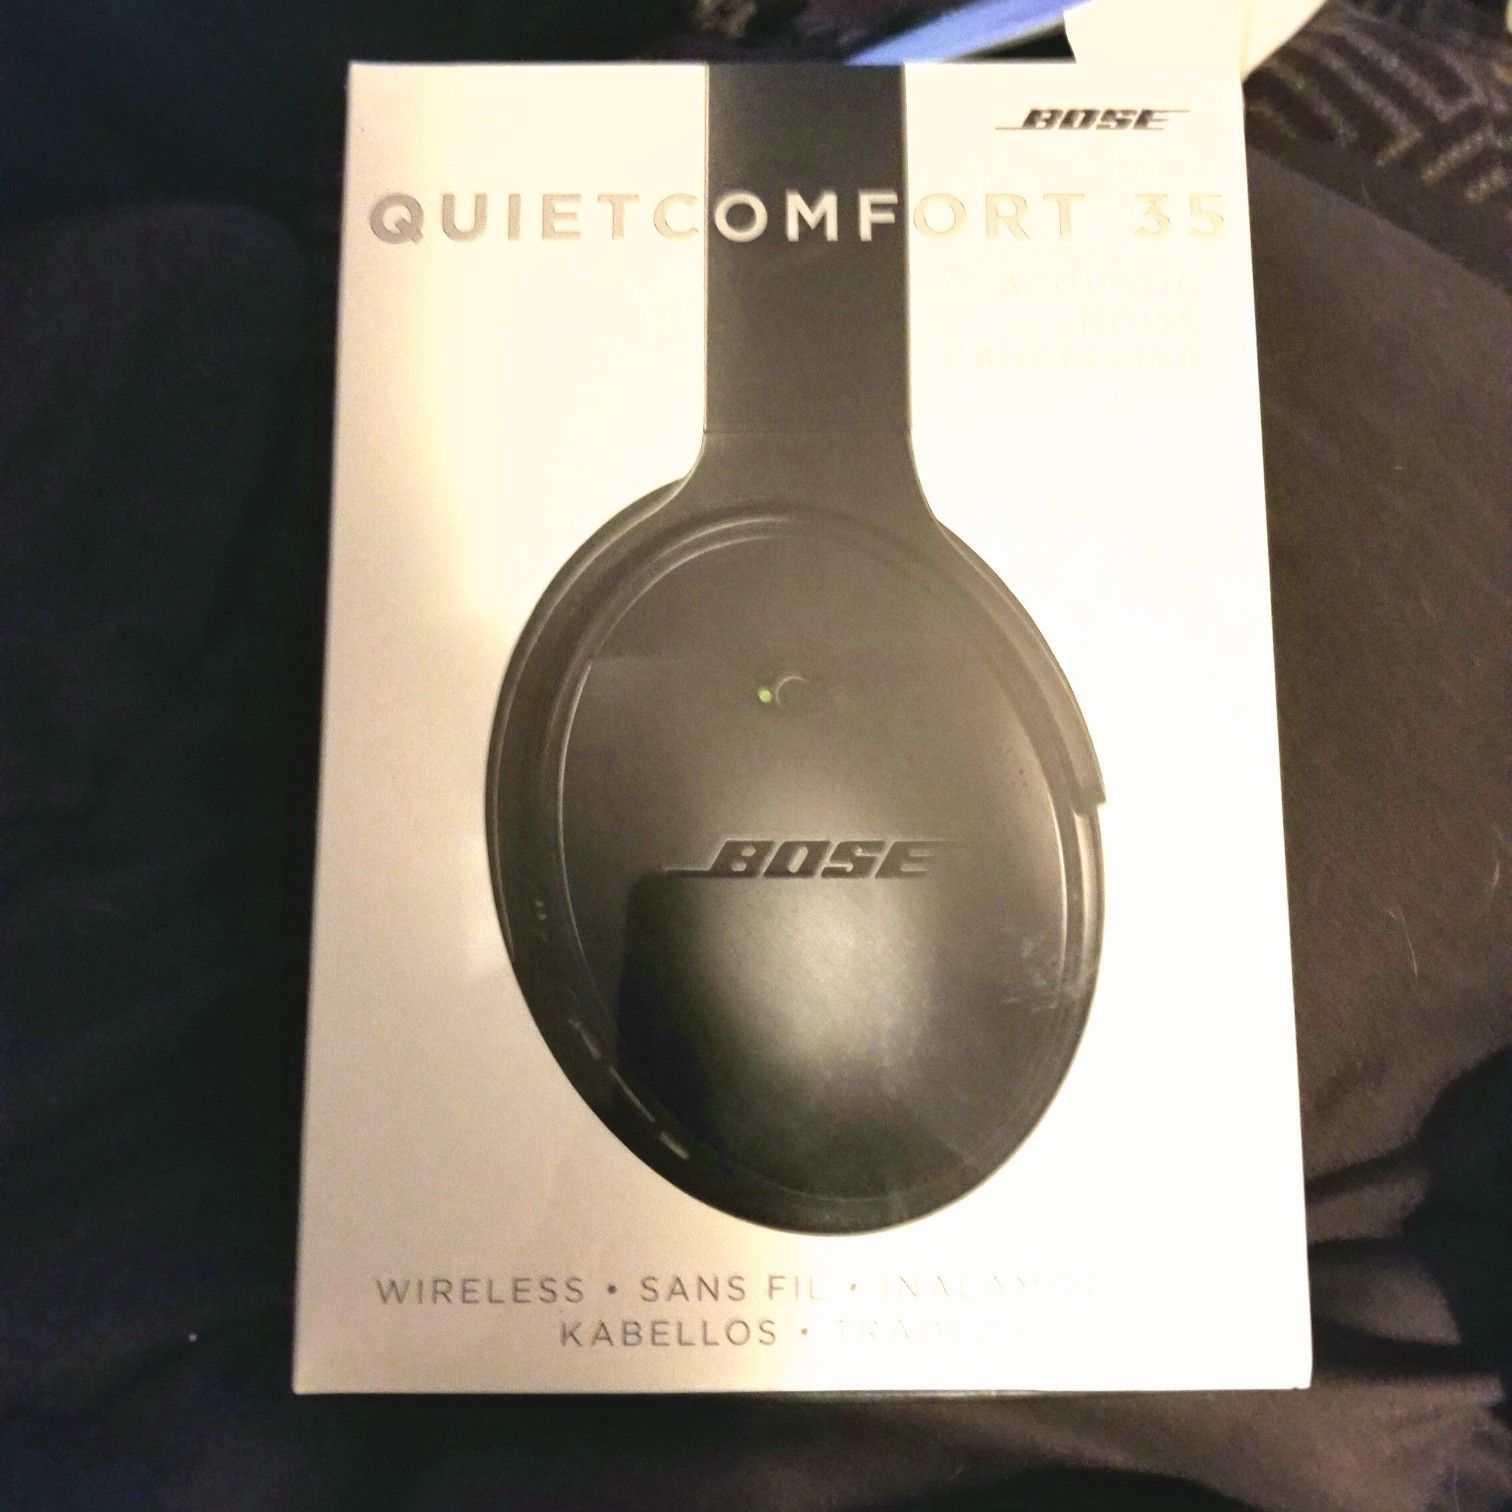 Bose noise cancelling wireless headphones